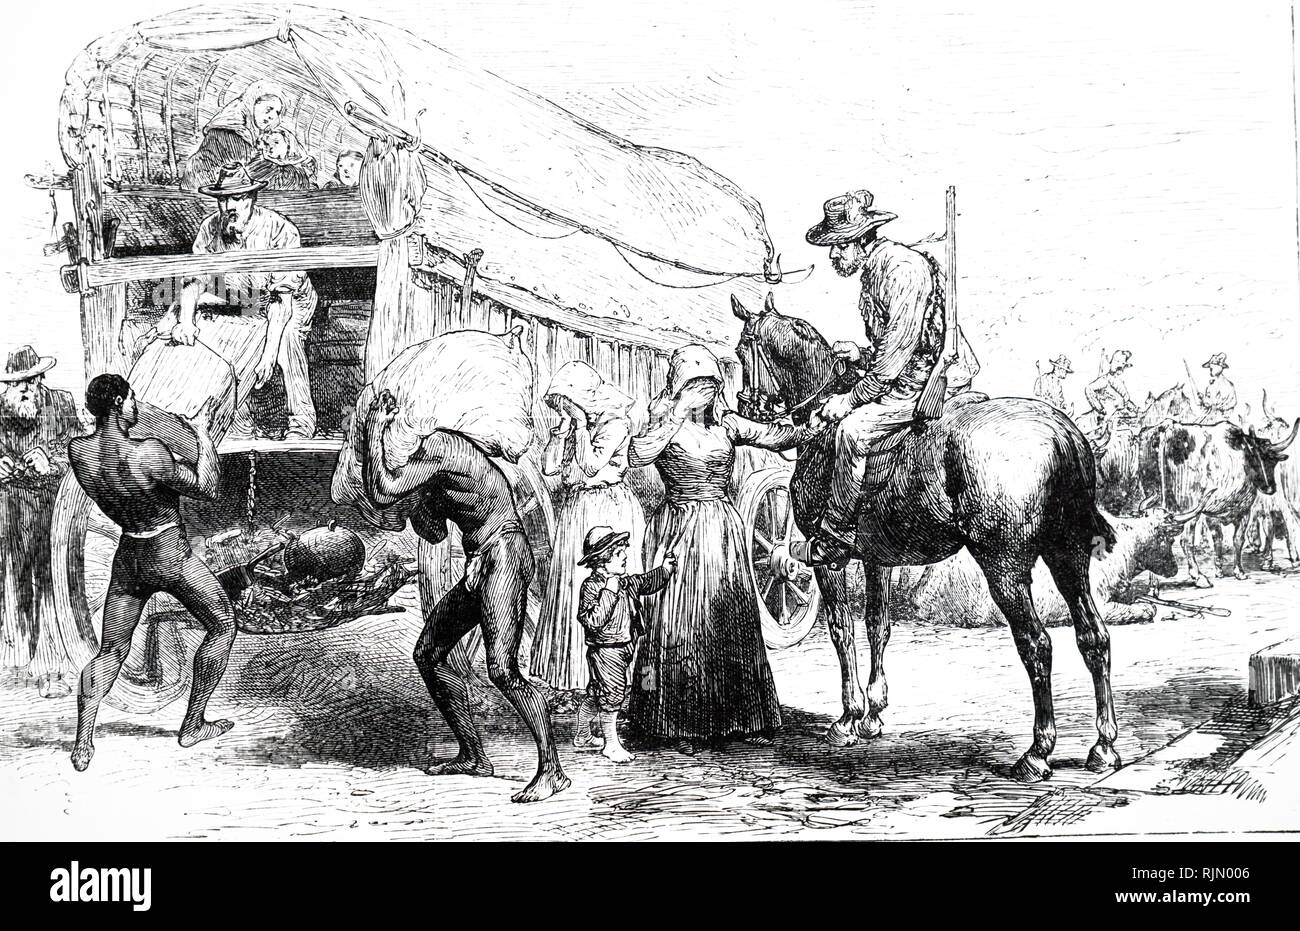 Illustration showing Unrest in Bechuianaland (Botswana): Boers levying unlawful duties on trader's Wagons. Cecil Rhodes helped secure much of Bechuanaland for Britain, in opposition to the Transvaal Republic. During the Scramble for Africa the territory of Botswana was coveted by both Germany and Great Britain. During the Berlin Conference, Britain decided to annex Botswana in order to safeguard the Road to the North and thus connect the Cape Colony to its territories further north. It unilaterally annexed Tswana territories in January 1885 Stock Photo